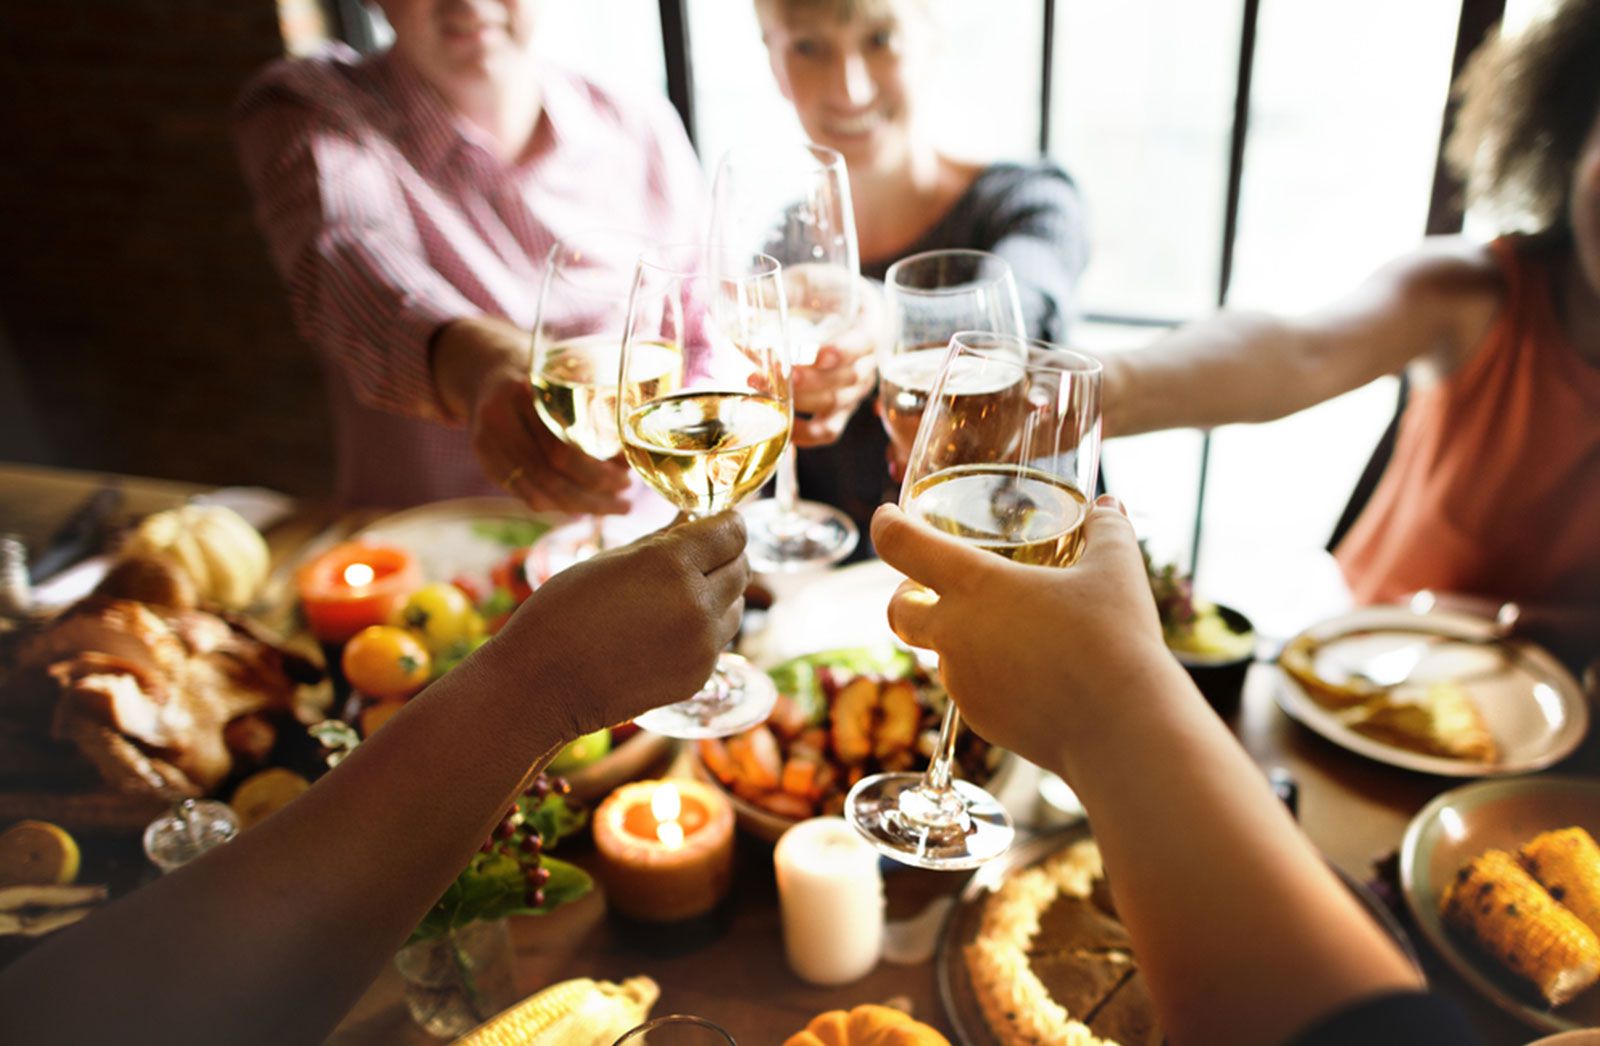 People toasting each other at a Thanksgiving table